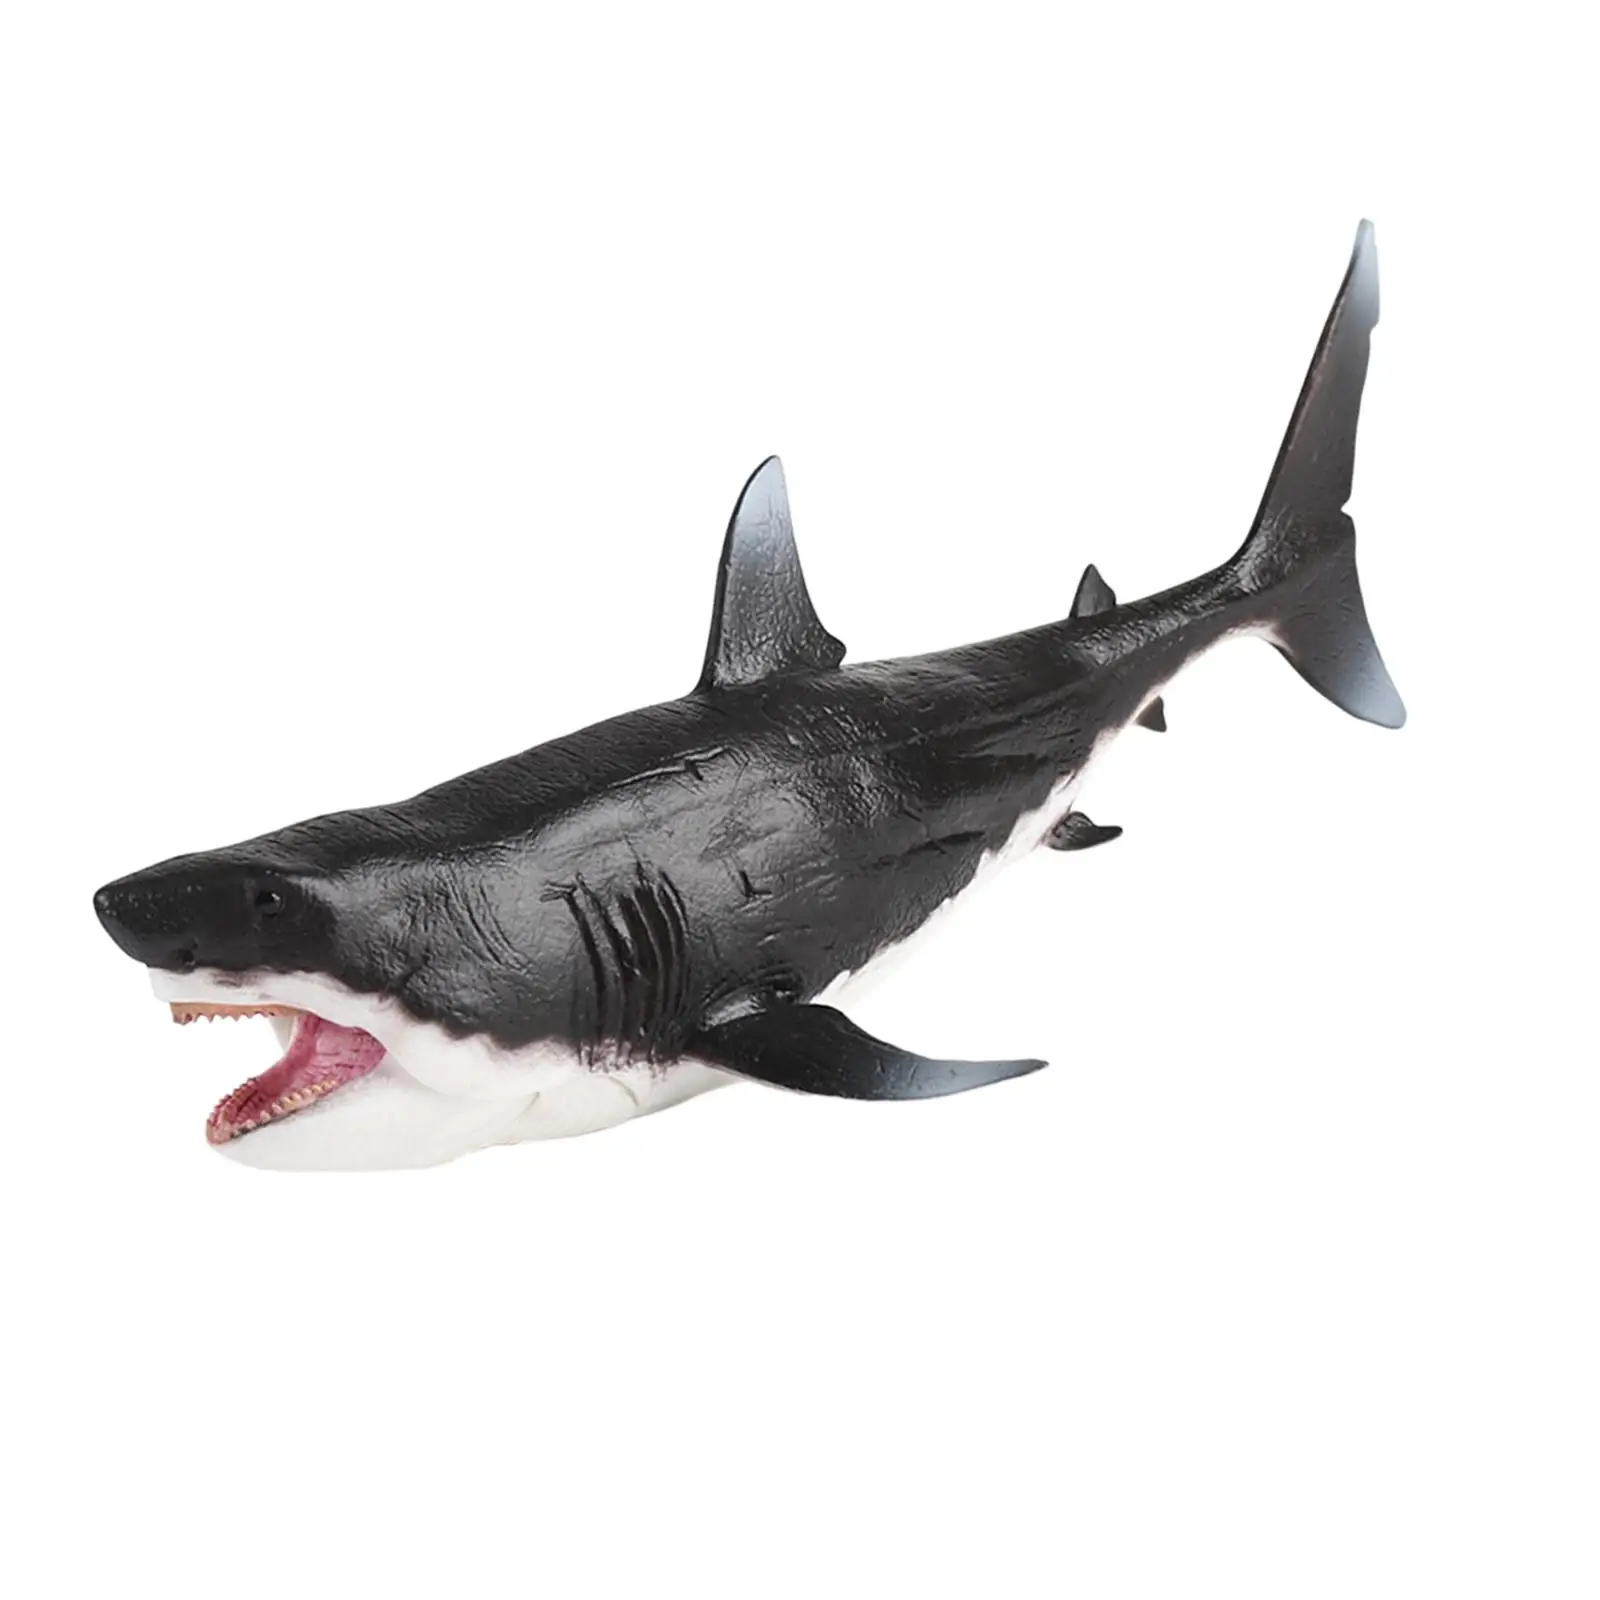 Megalodon Action Figure Toy Aquarium Big Shark Fish for Kids Birthday Gifts